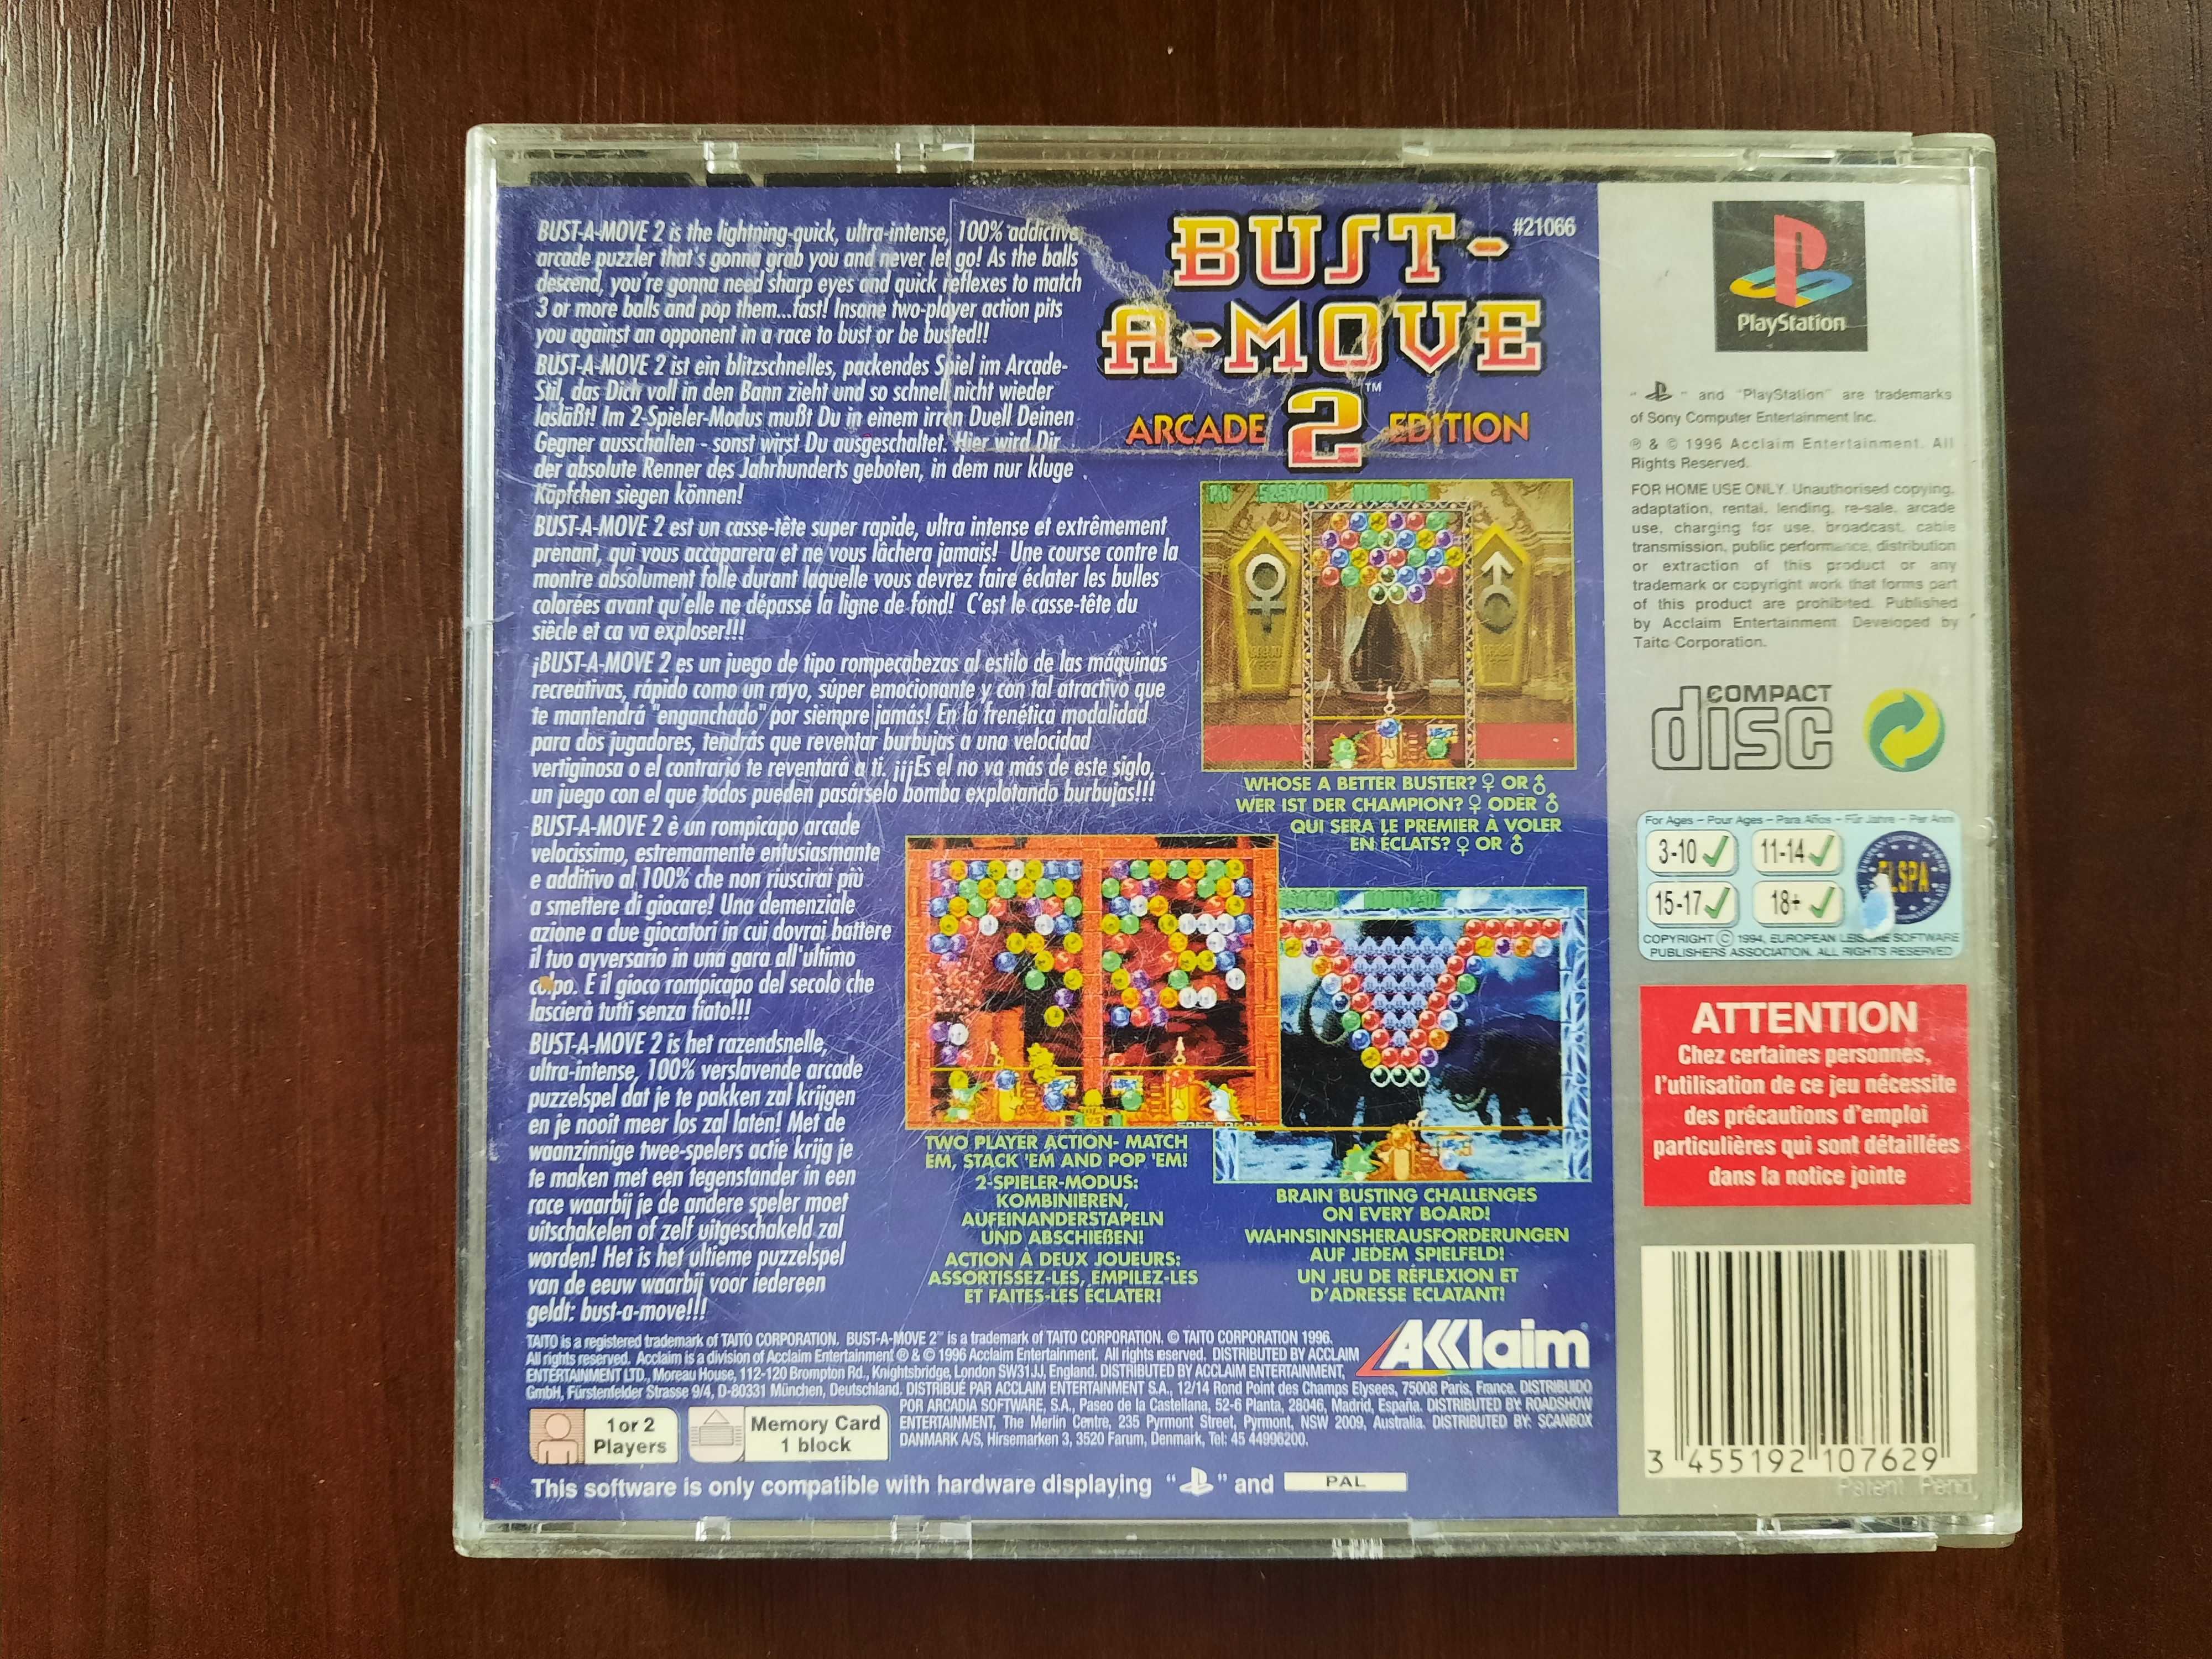 Bust A Move 2 Arcade Edition psx PS1